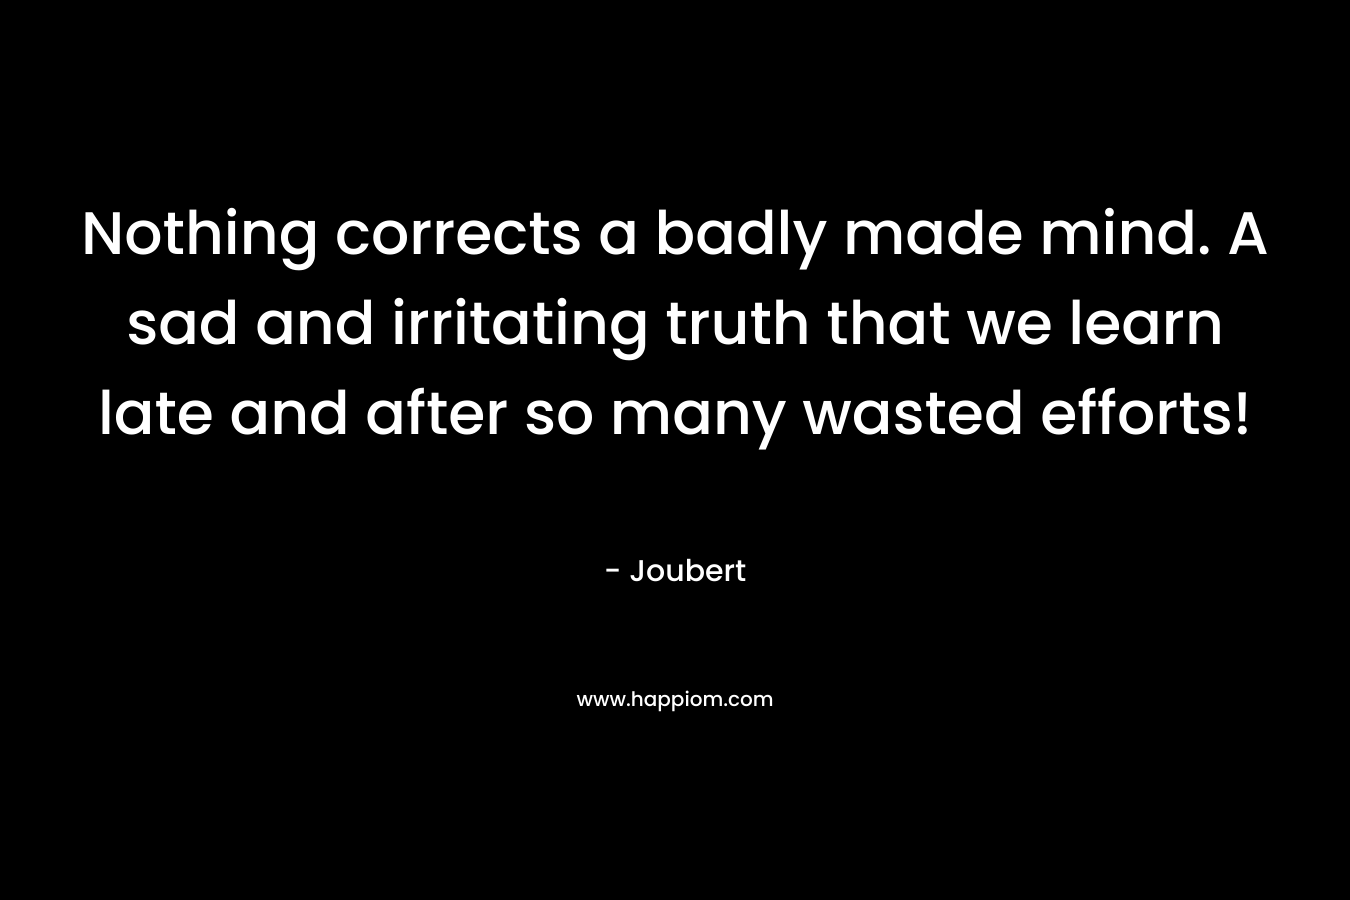 Nothing corrects a badly made mind. A sad and irritating truth that we learn late and after so many wasted efforts!